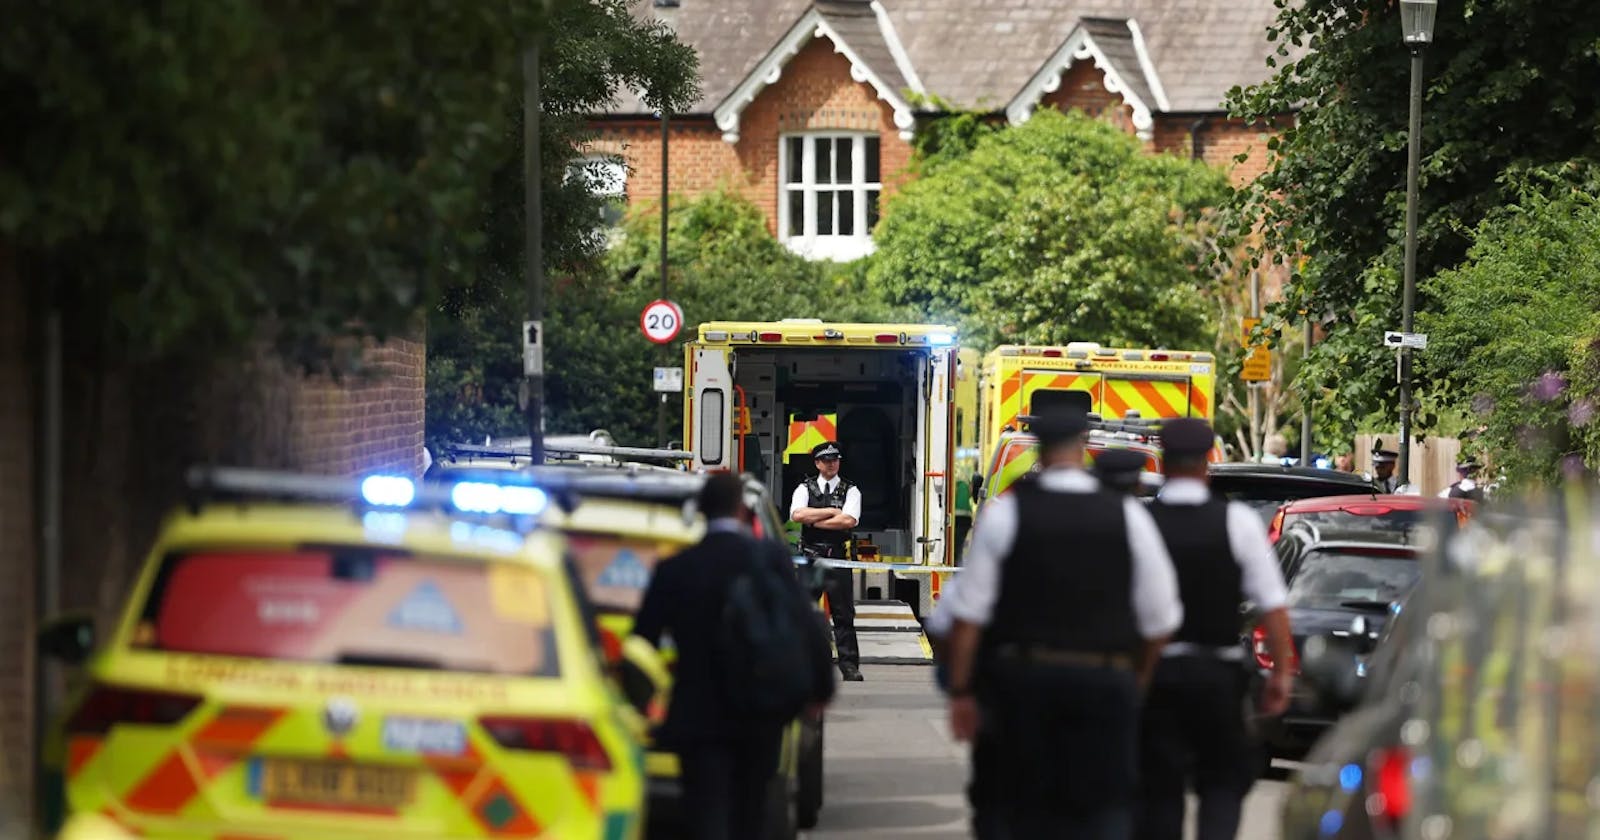 Seven children injured as car crashes into elementary school in Wimbledon, London